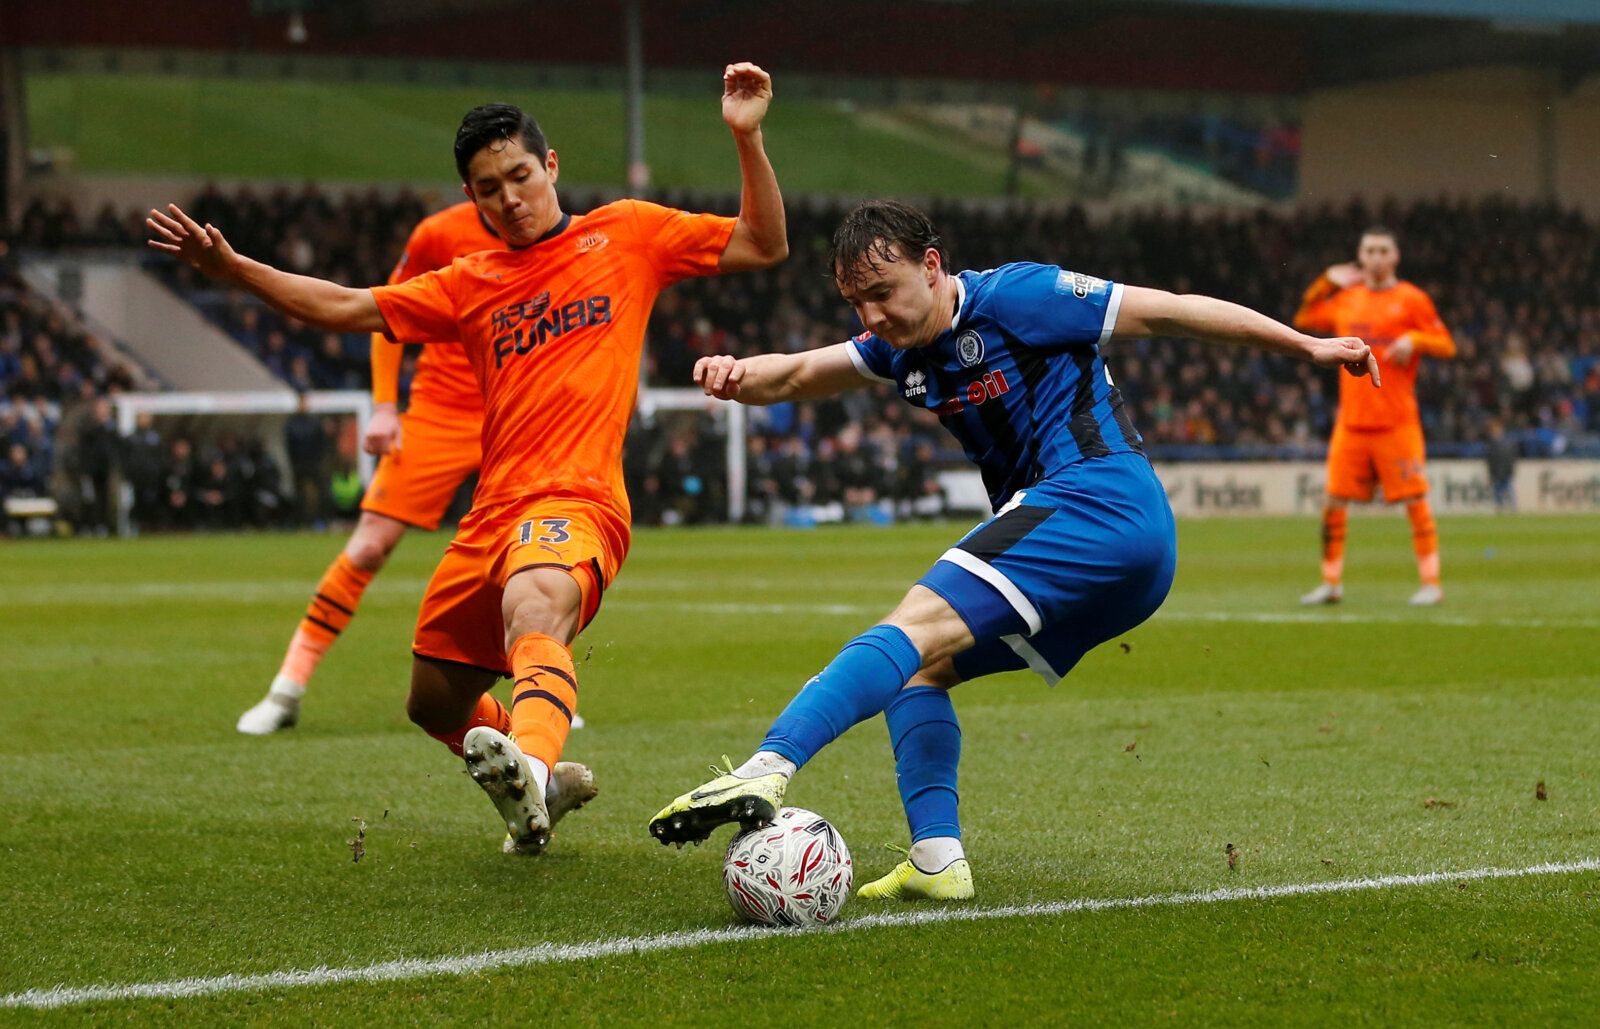 Soccer Football - FA Cup - Third Round - Rochdale v Newcastle United - The Crown Oil Arena, Rochdale, Britain - January 4, 2020  Newcastle United's Yoshinori Muto in action with Rochdale's Oliver Rathbone           Action Images via Reuters/Craig Brough